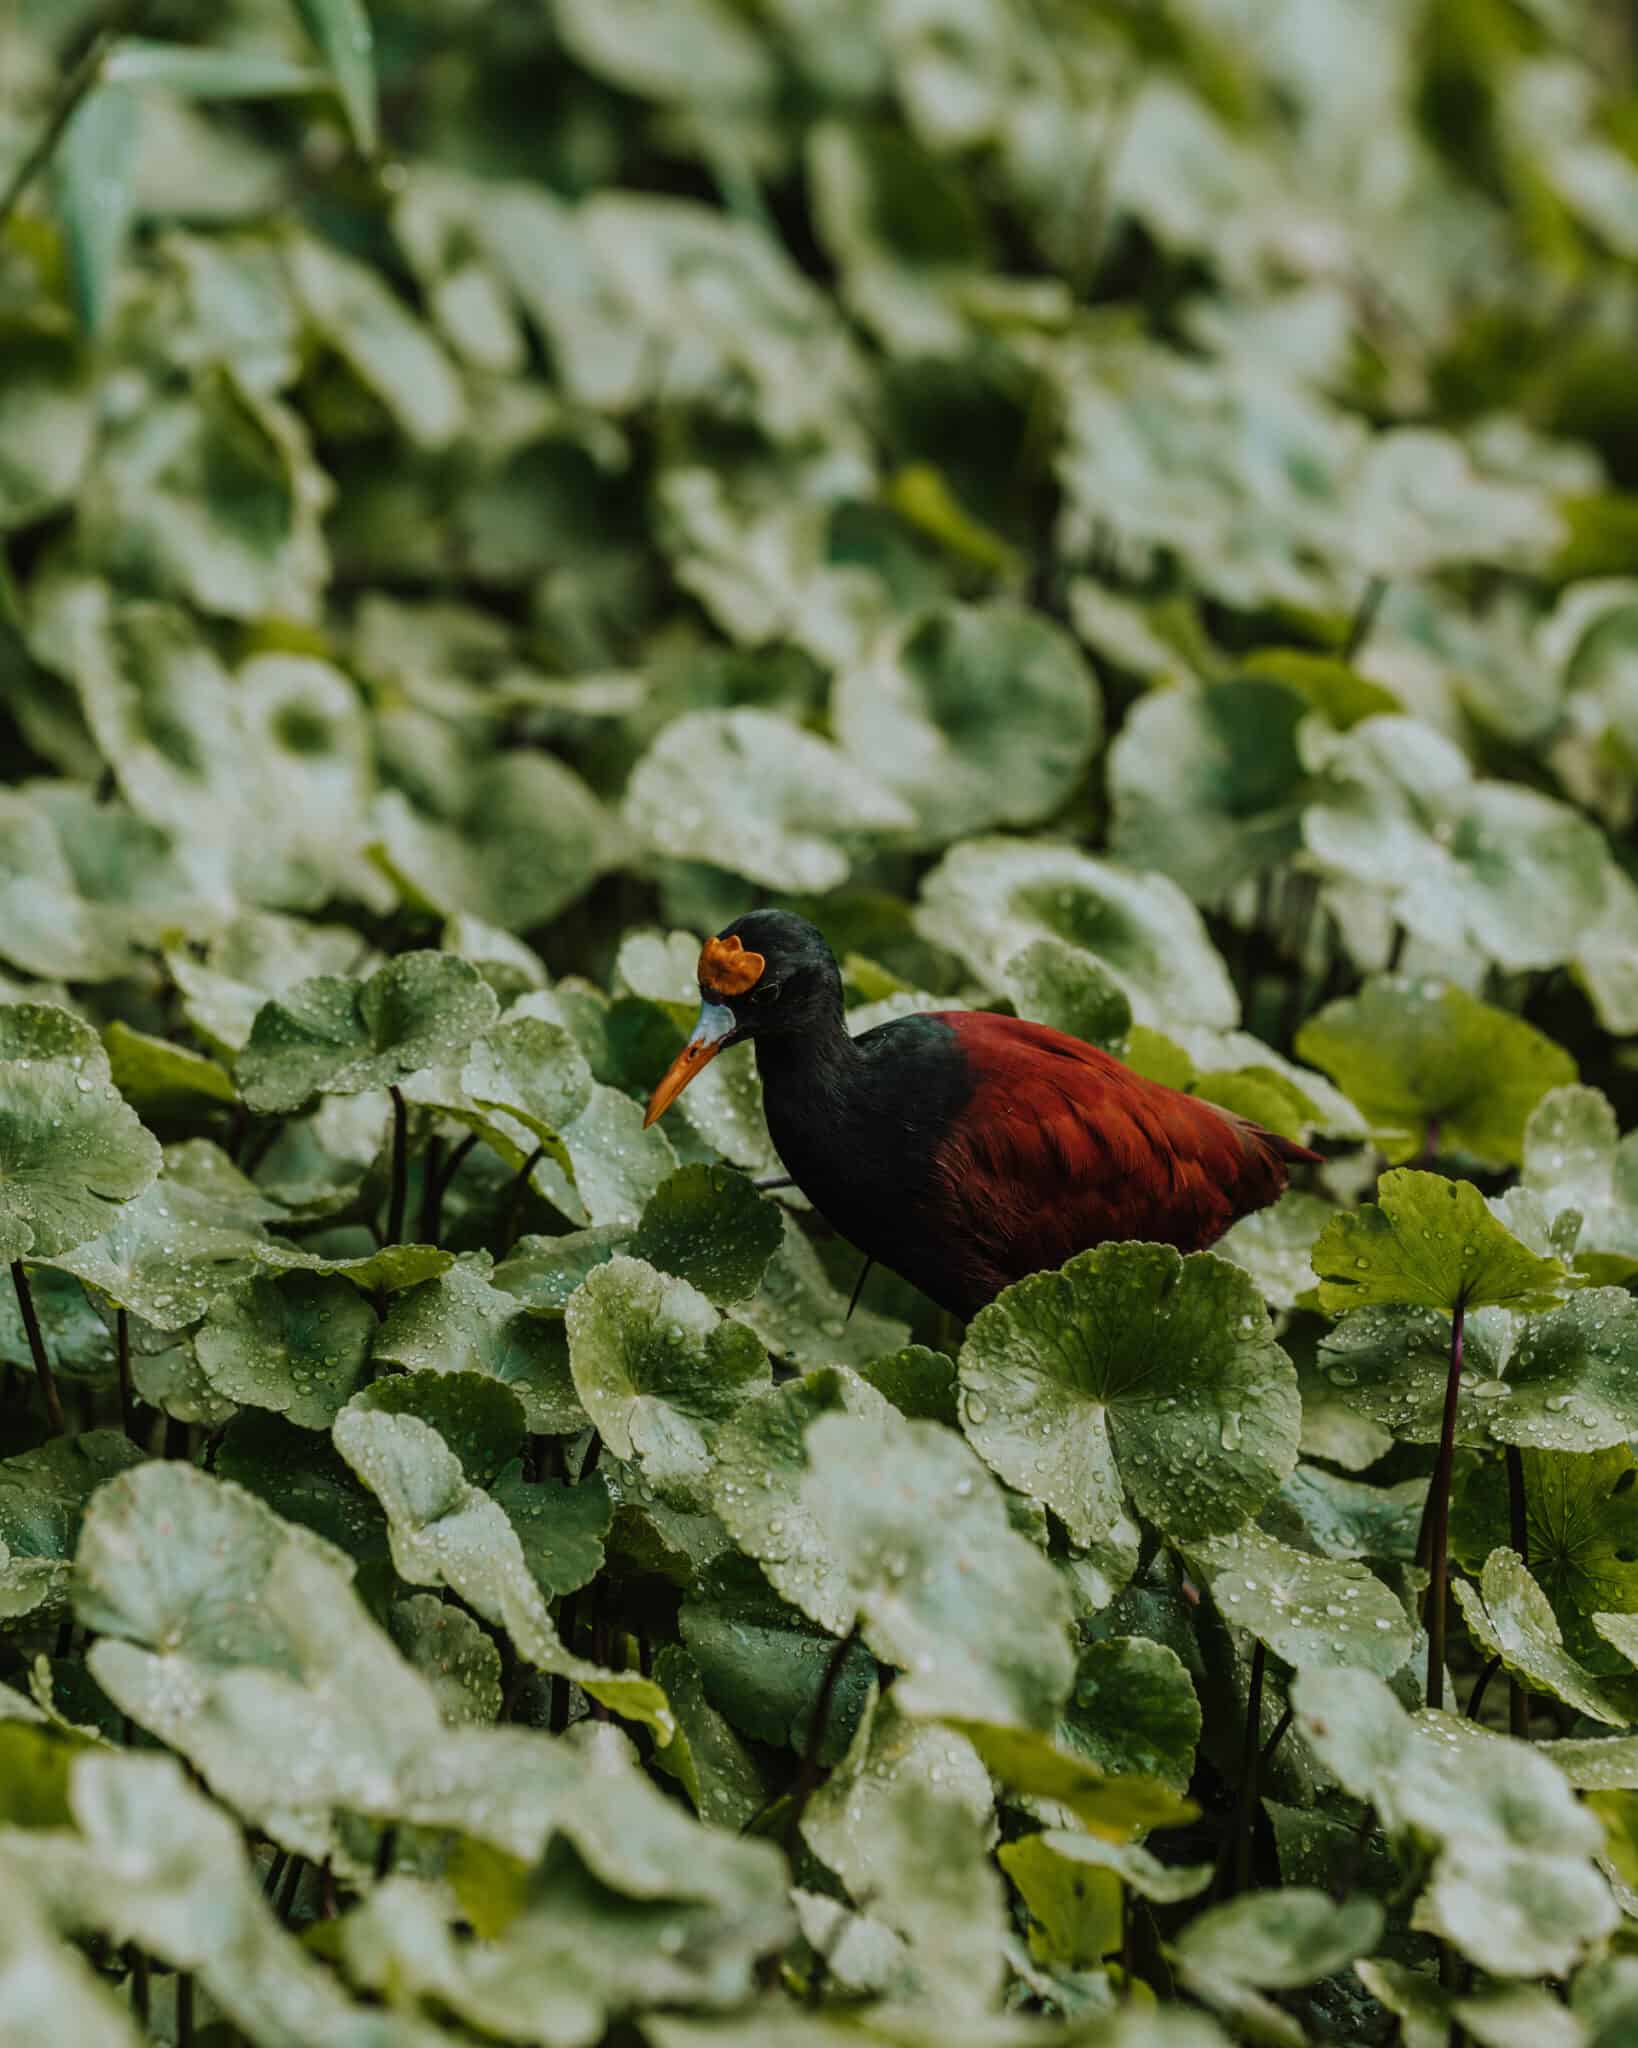 A bird is standing in a pond in Tortuguero, Costa Rica, full of lily pads.